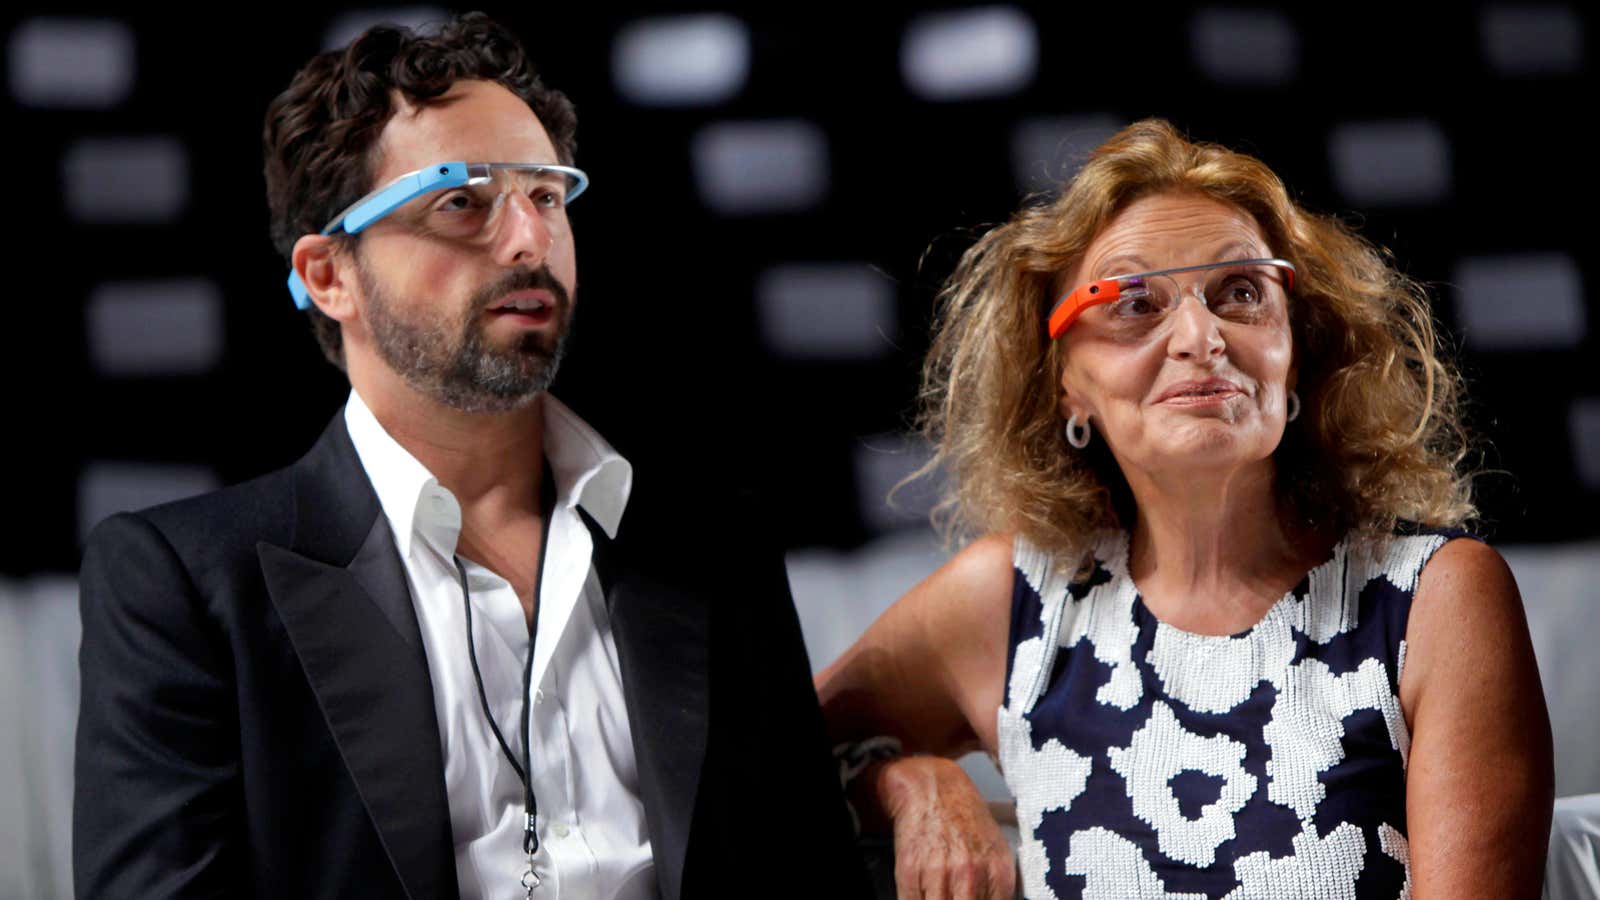 Ironically, the makers of Google Glass may be among the only people who can stop digital snooping.